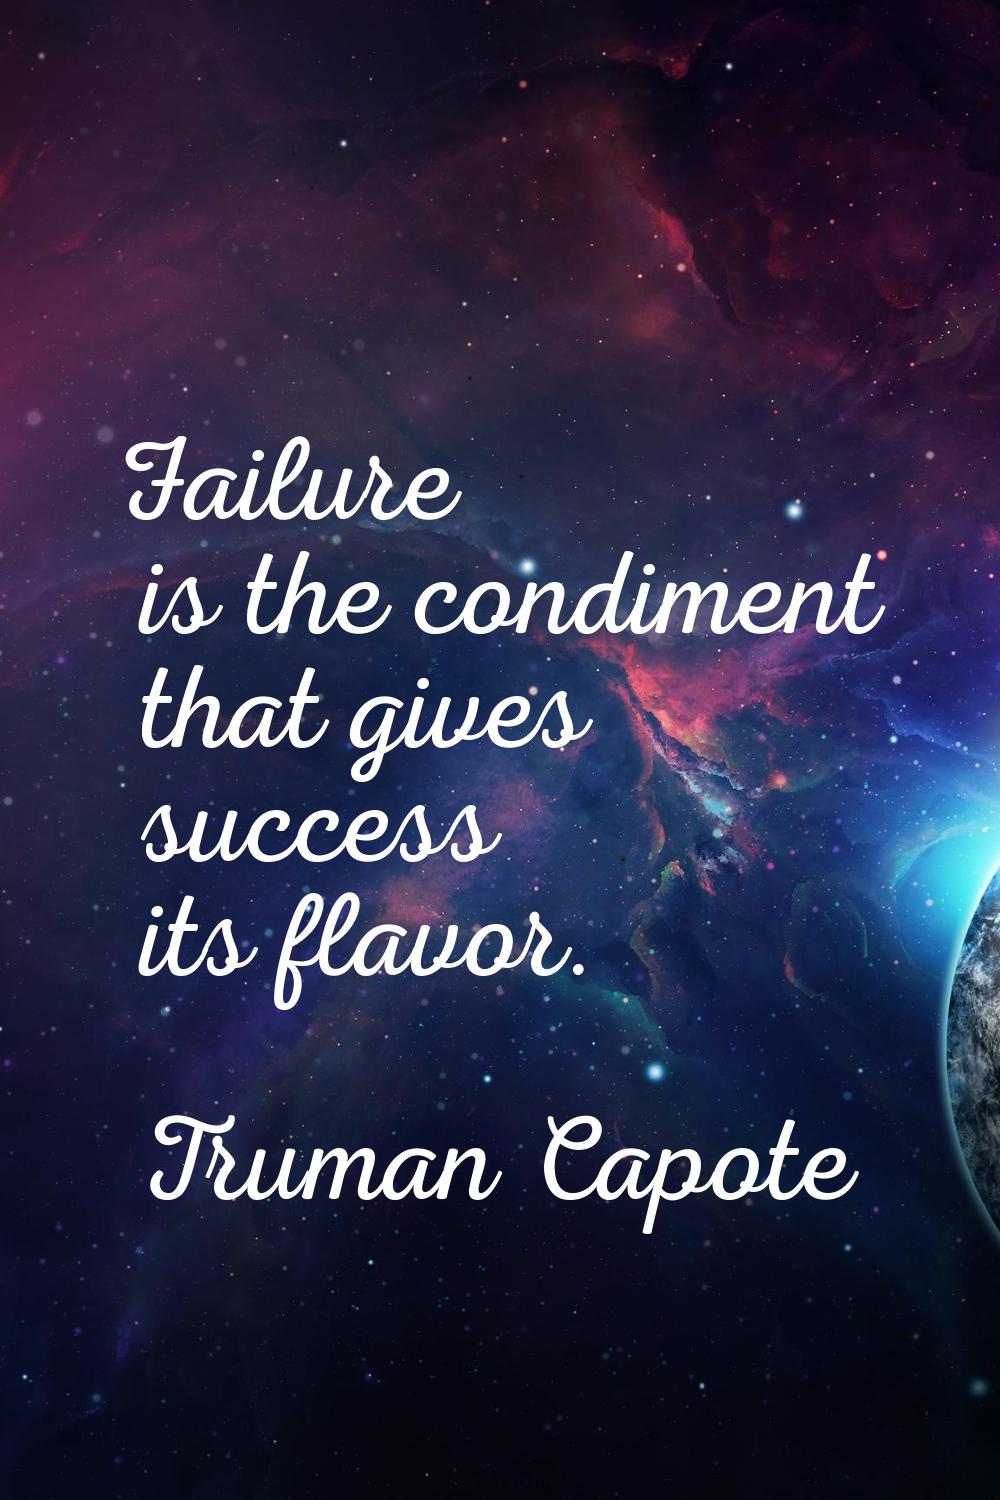 Failure is the condiment that gives success its flavor.